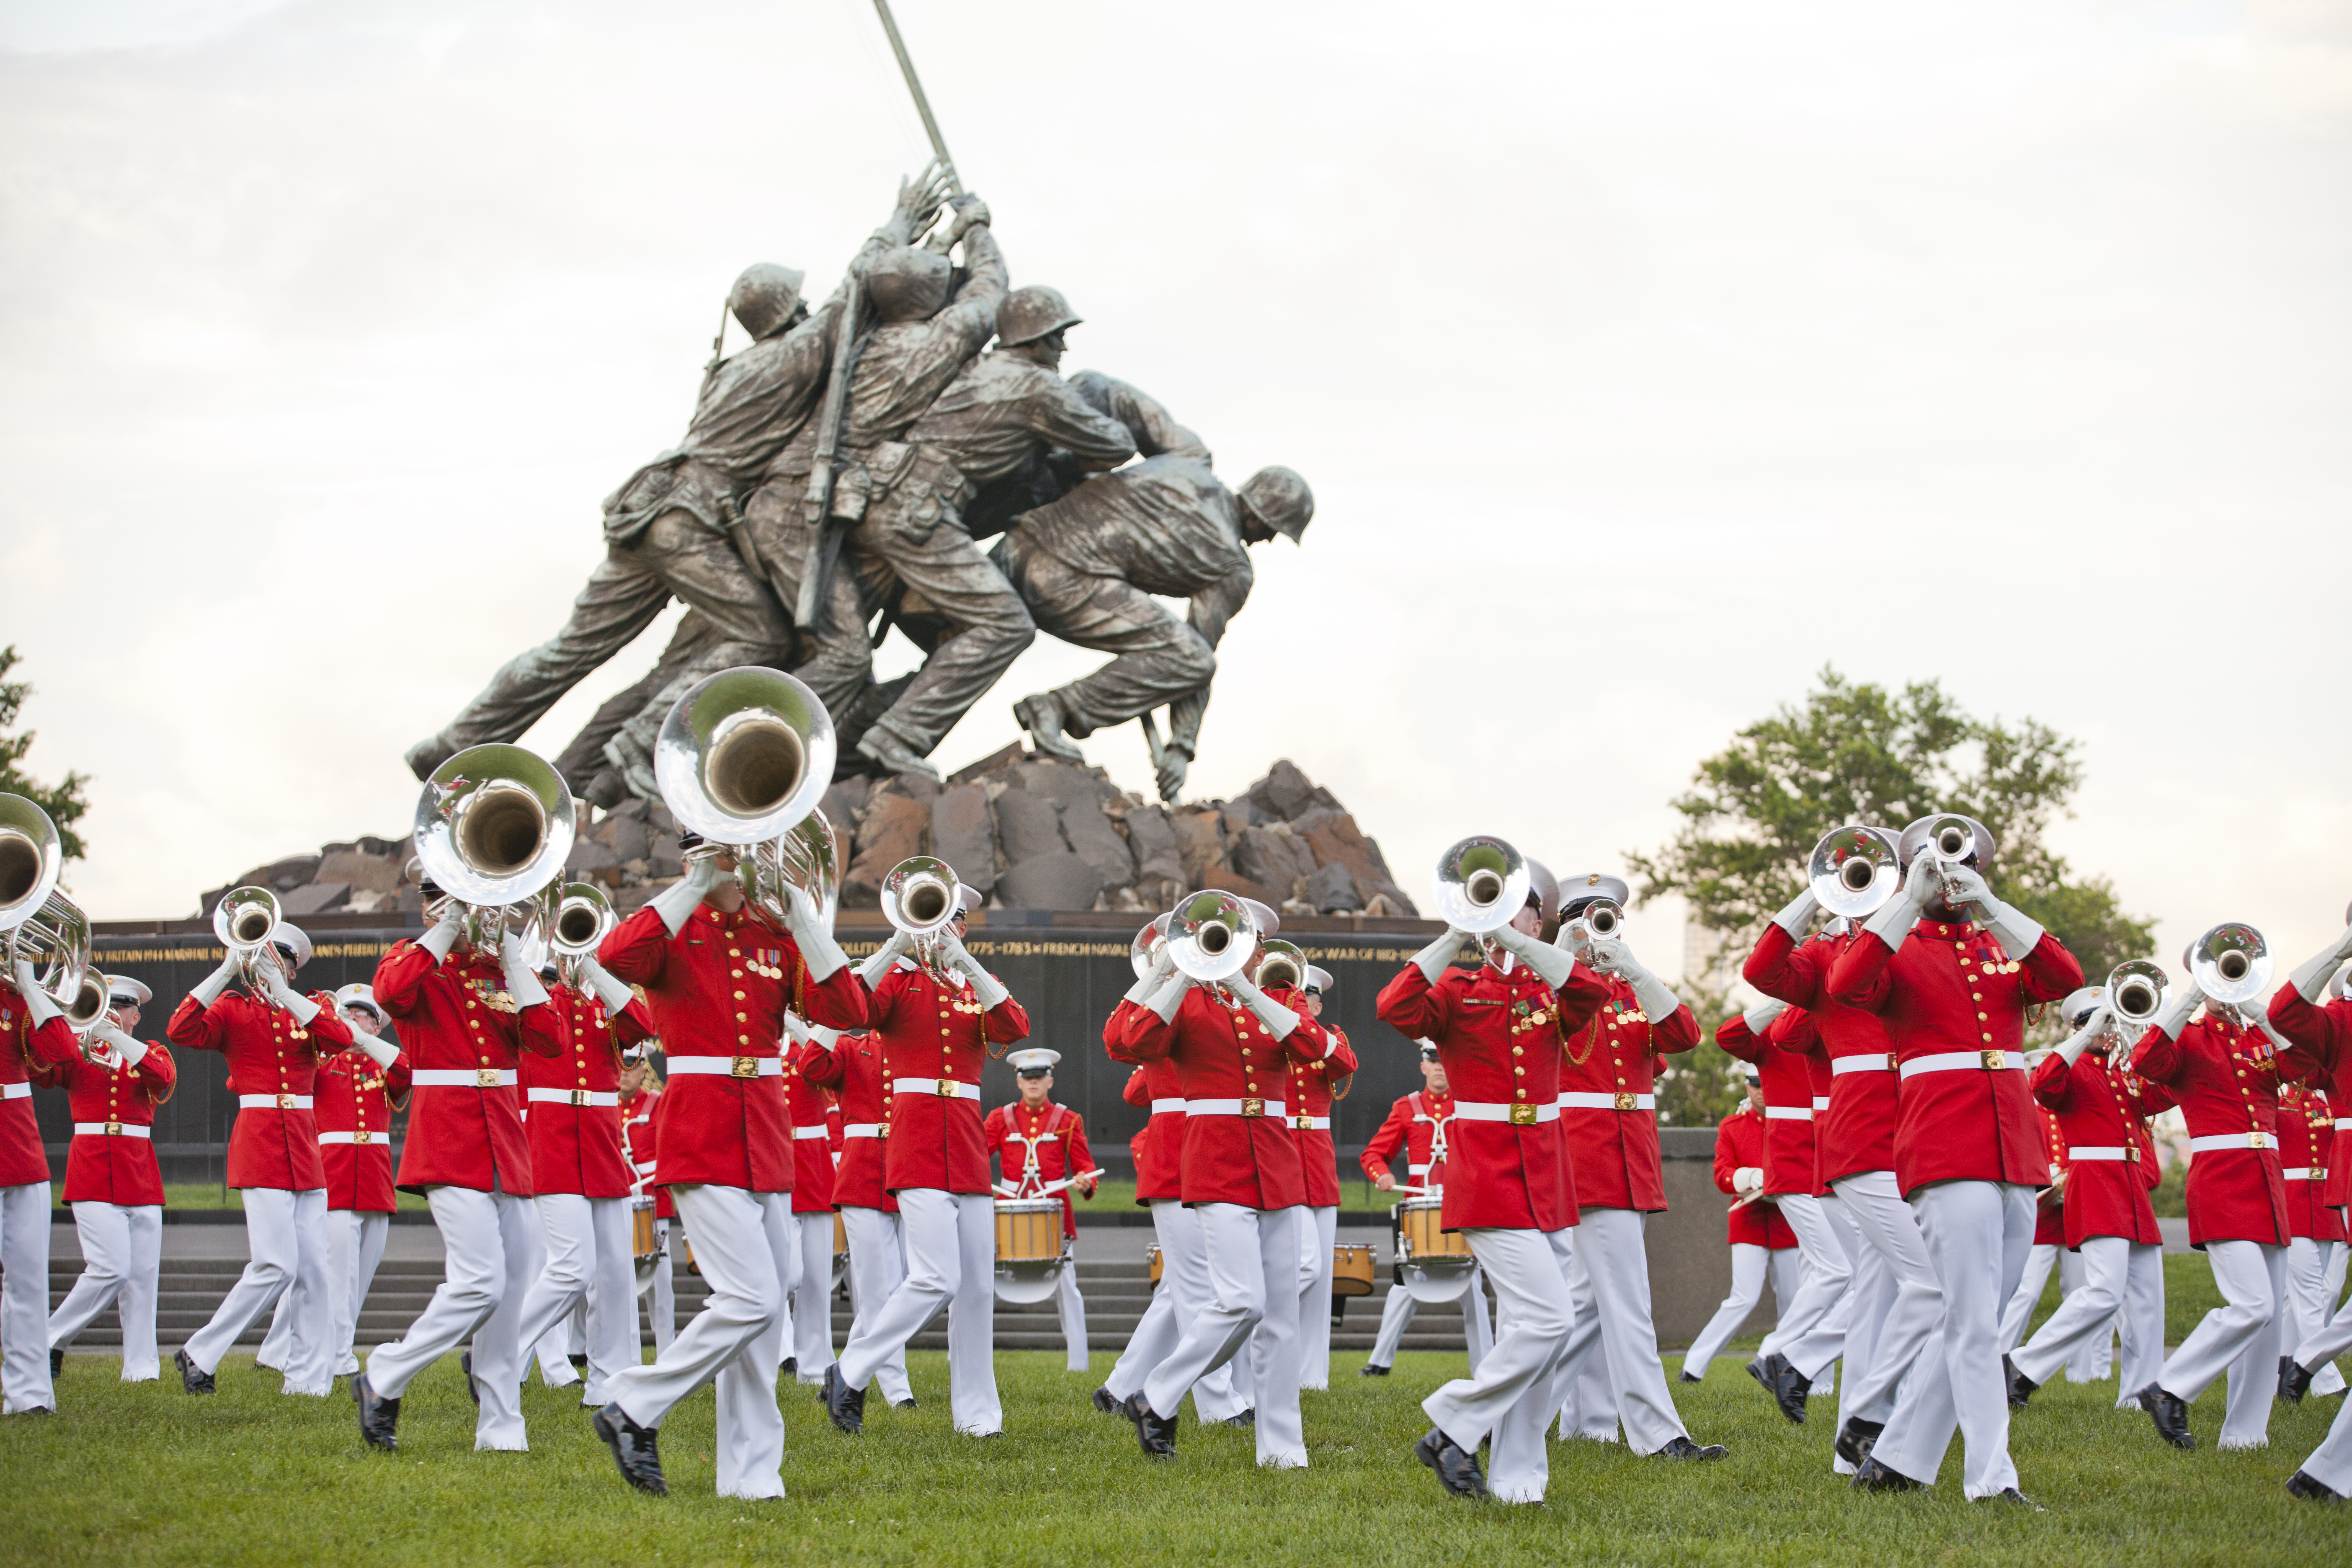 18 24 июня. Parade in June 1836 by Utrecht students. The Marine Corps Monument background. Drum Corps on Parade. The Marine Corps Museum background.